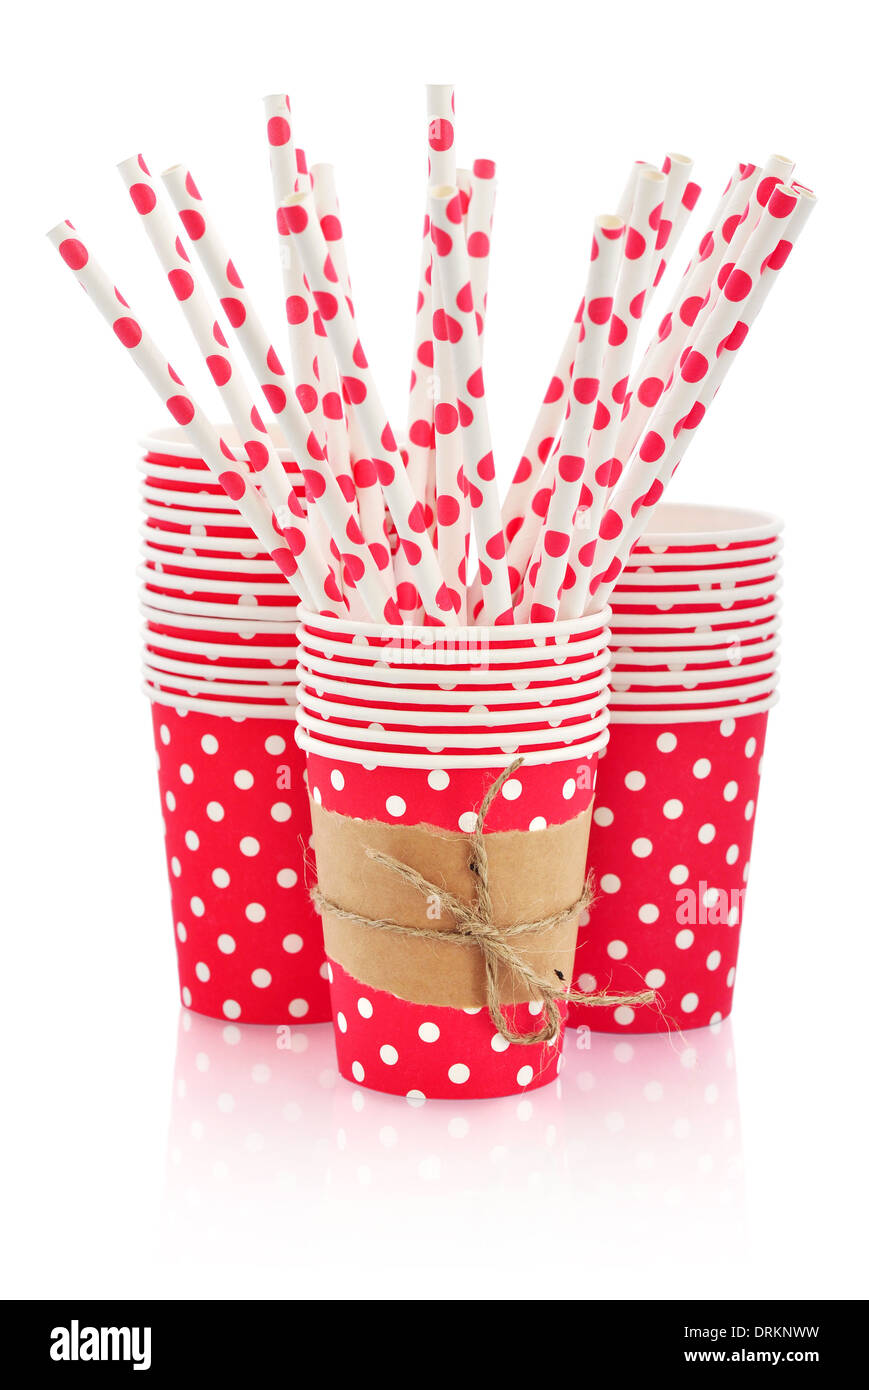 https://c8.alamy.com/comp/DRKNWW/red-paper-cups-and-polka-dot-straws-for-birthday-party-isolated-on-DRKNWW.jpg